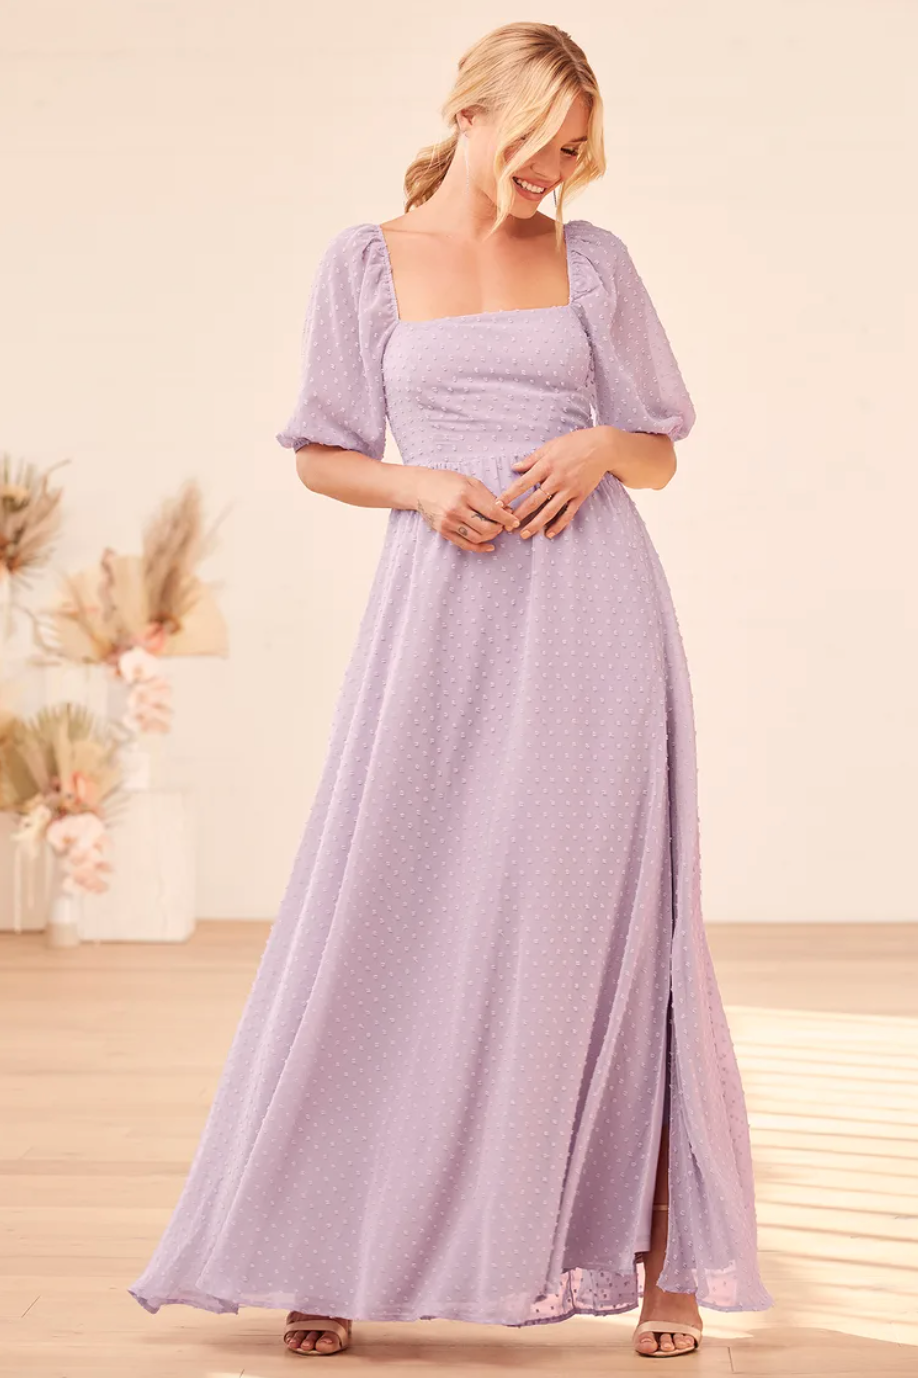 Lavender bridesmaid gown with sleeves perfect for a spring wedding